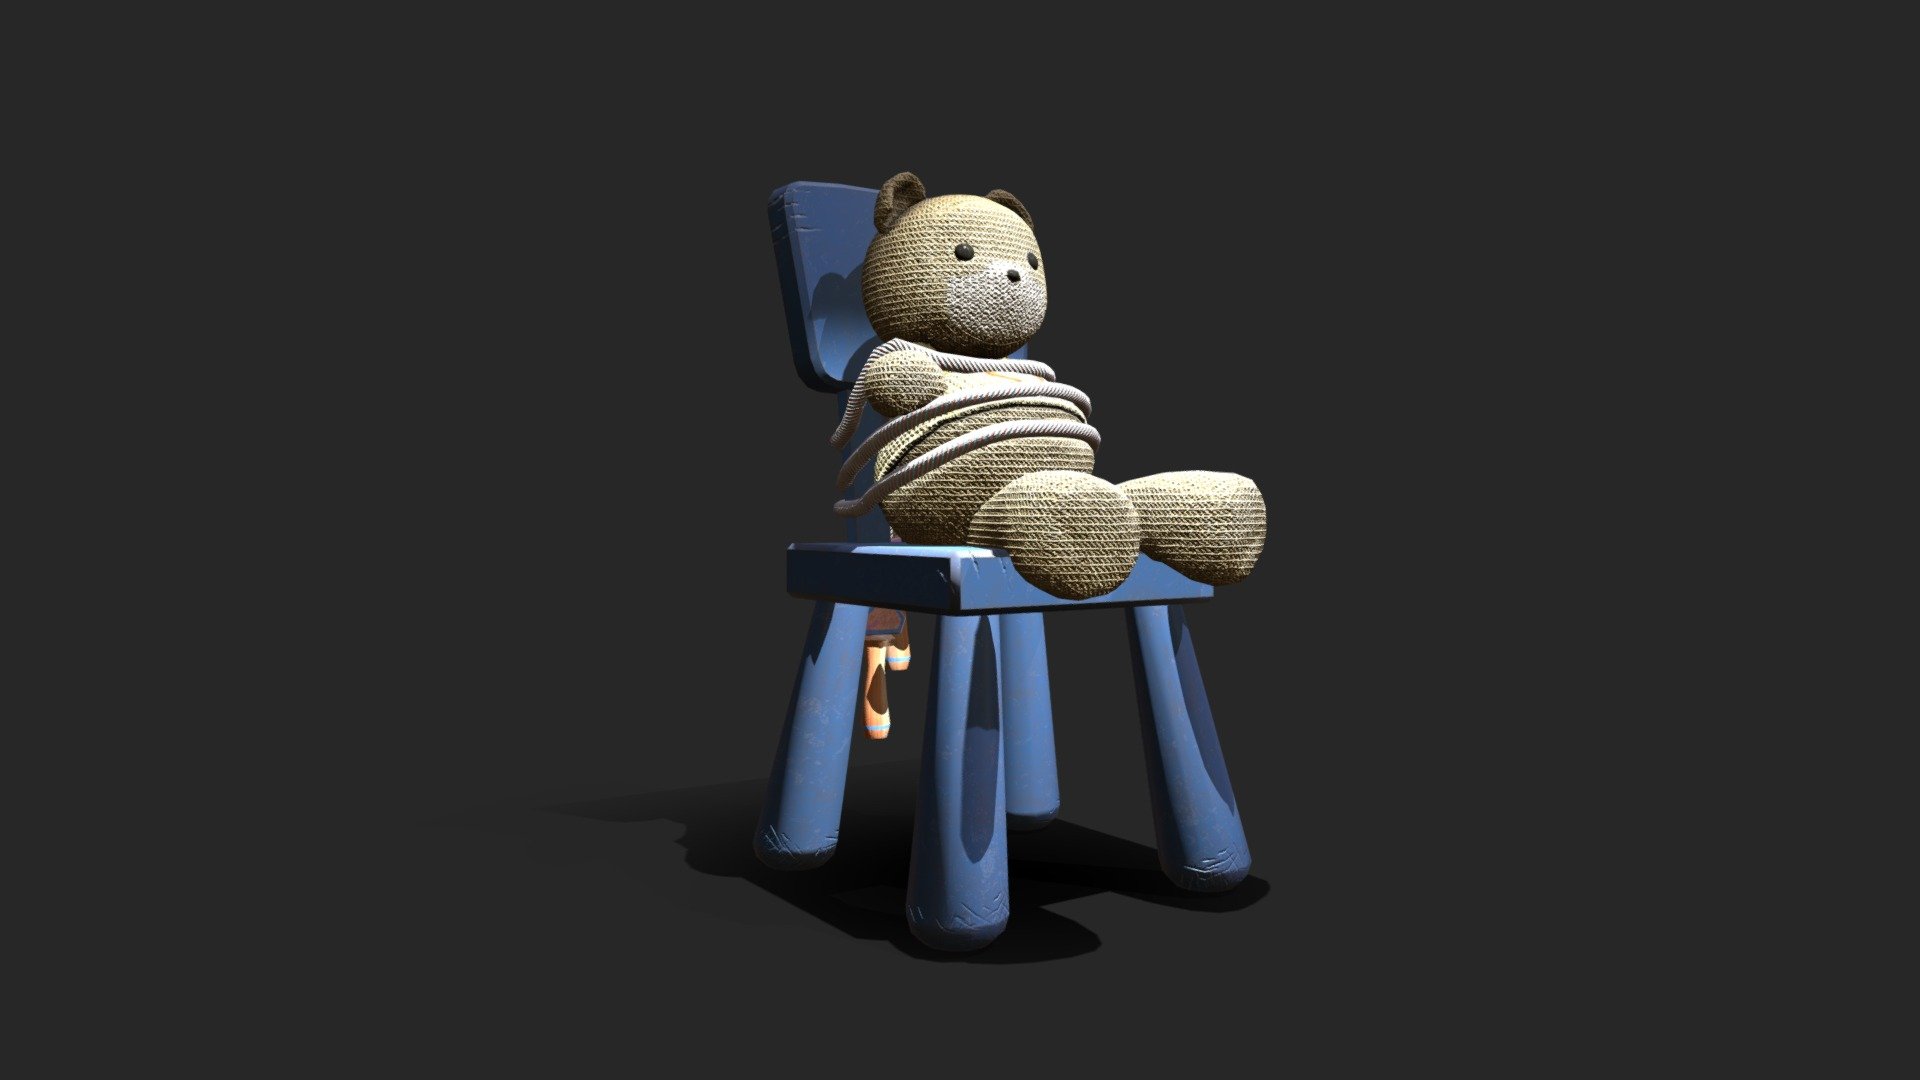 Scene of a teddy bear tied with a toy rope.
Low poly models, with detailed textures that create a very artistic set 3d model